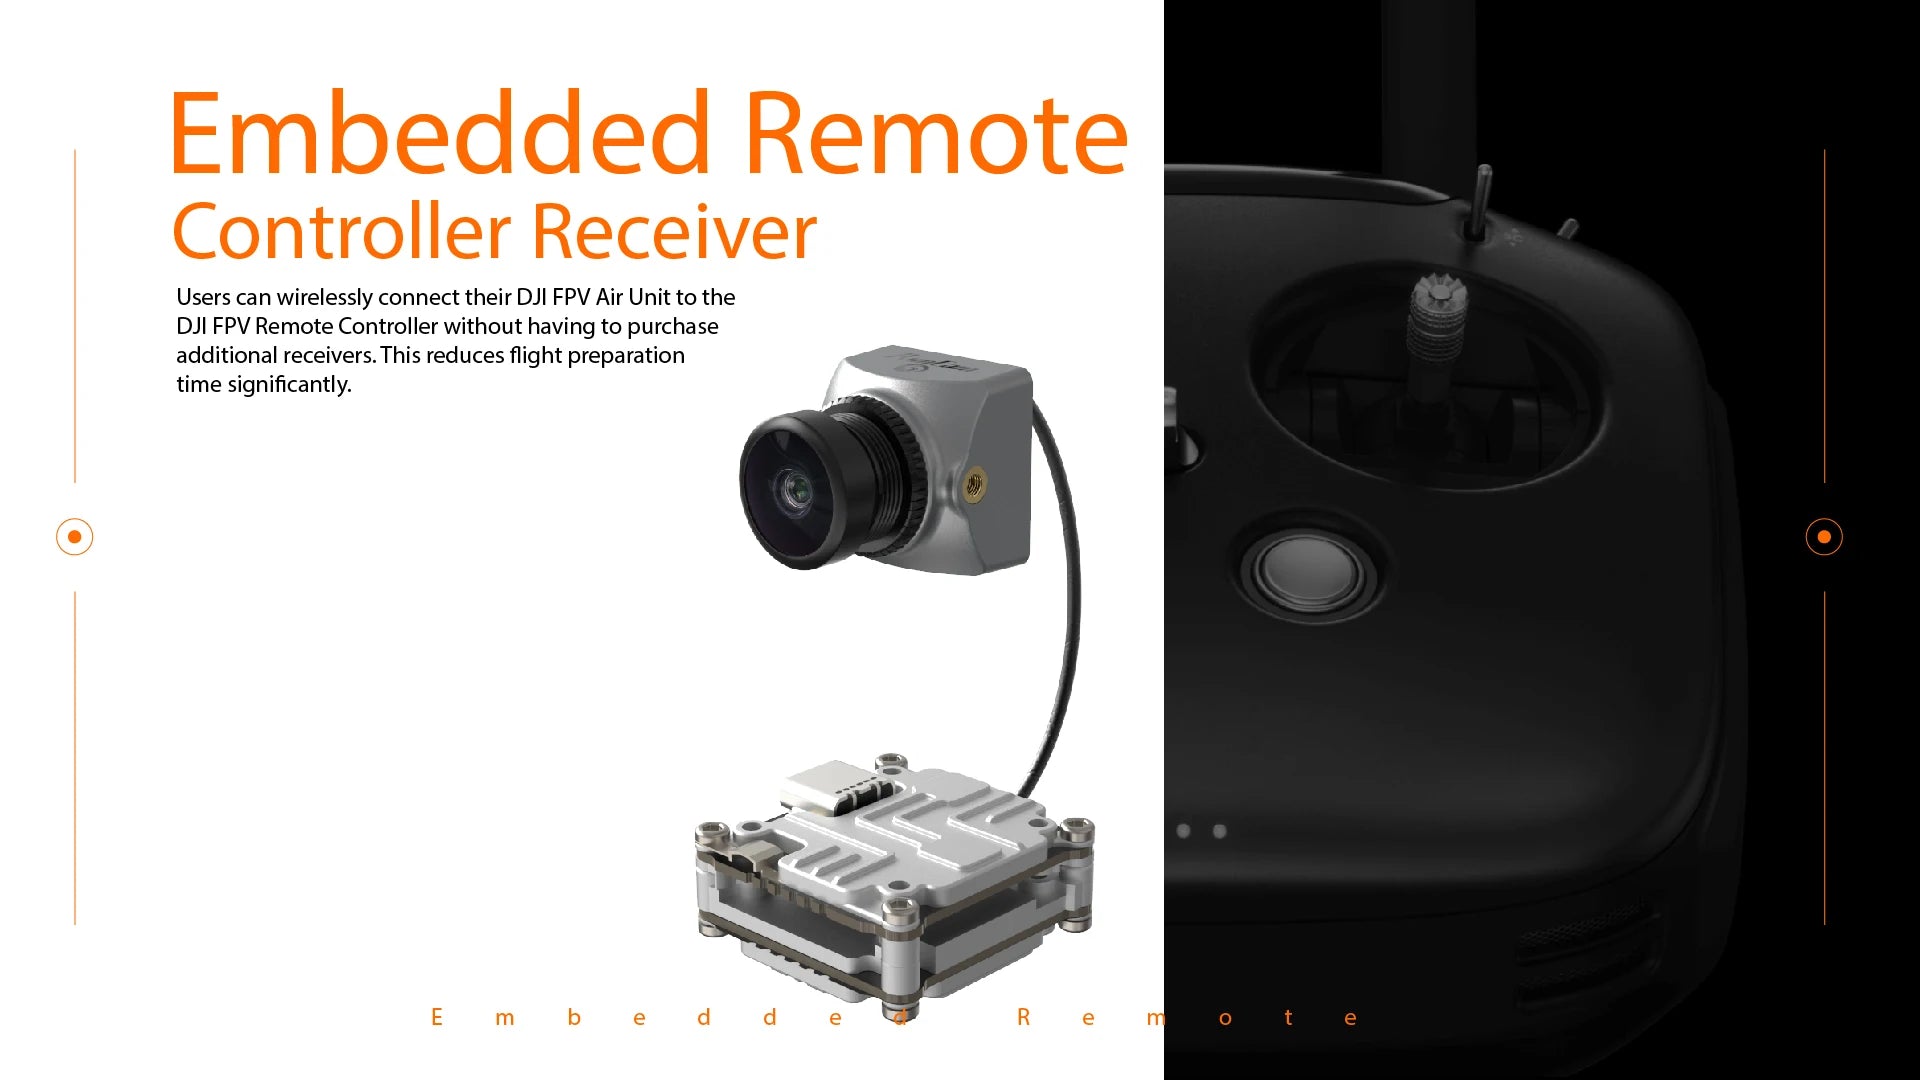 RunCam Link Phoenix HD Kit, Embedded Remote Controller Receiver Users can wirelessly connect their DJI FPV